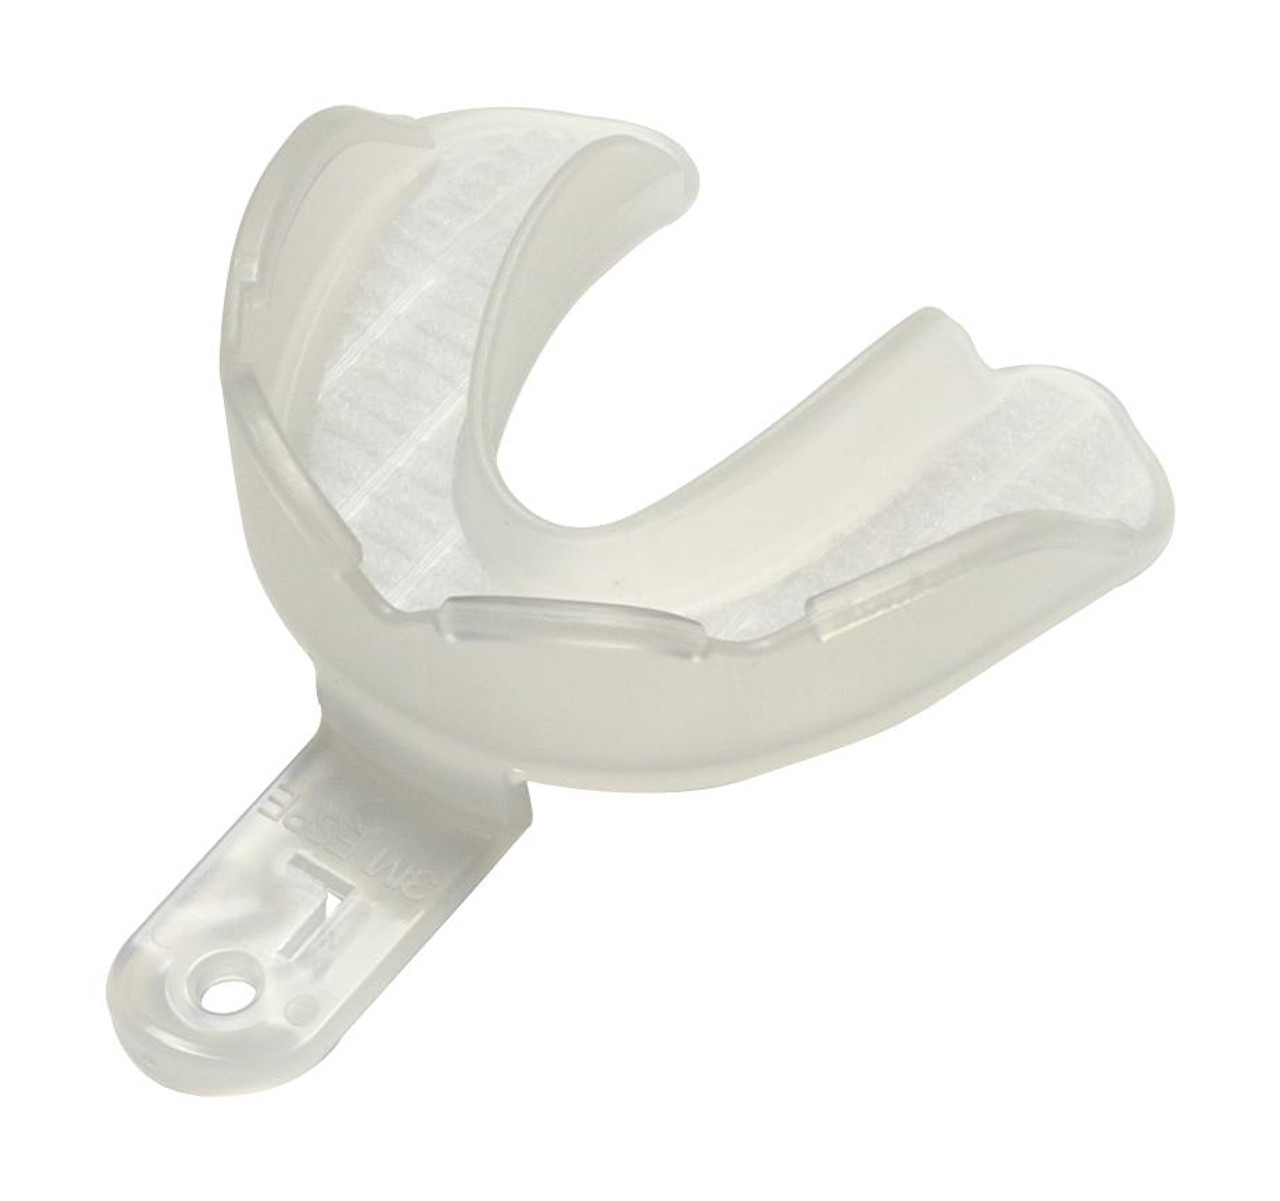 3M Impression Tray Size Large (L), Lower Refill, 71620